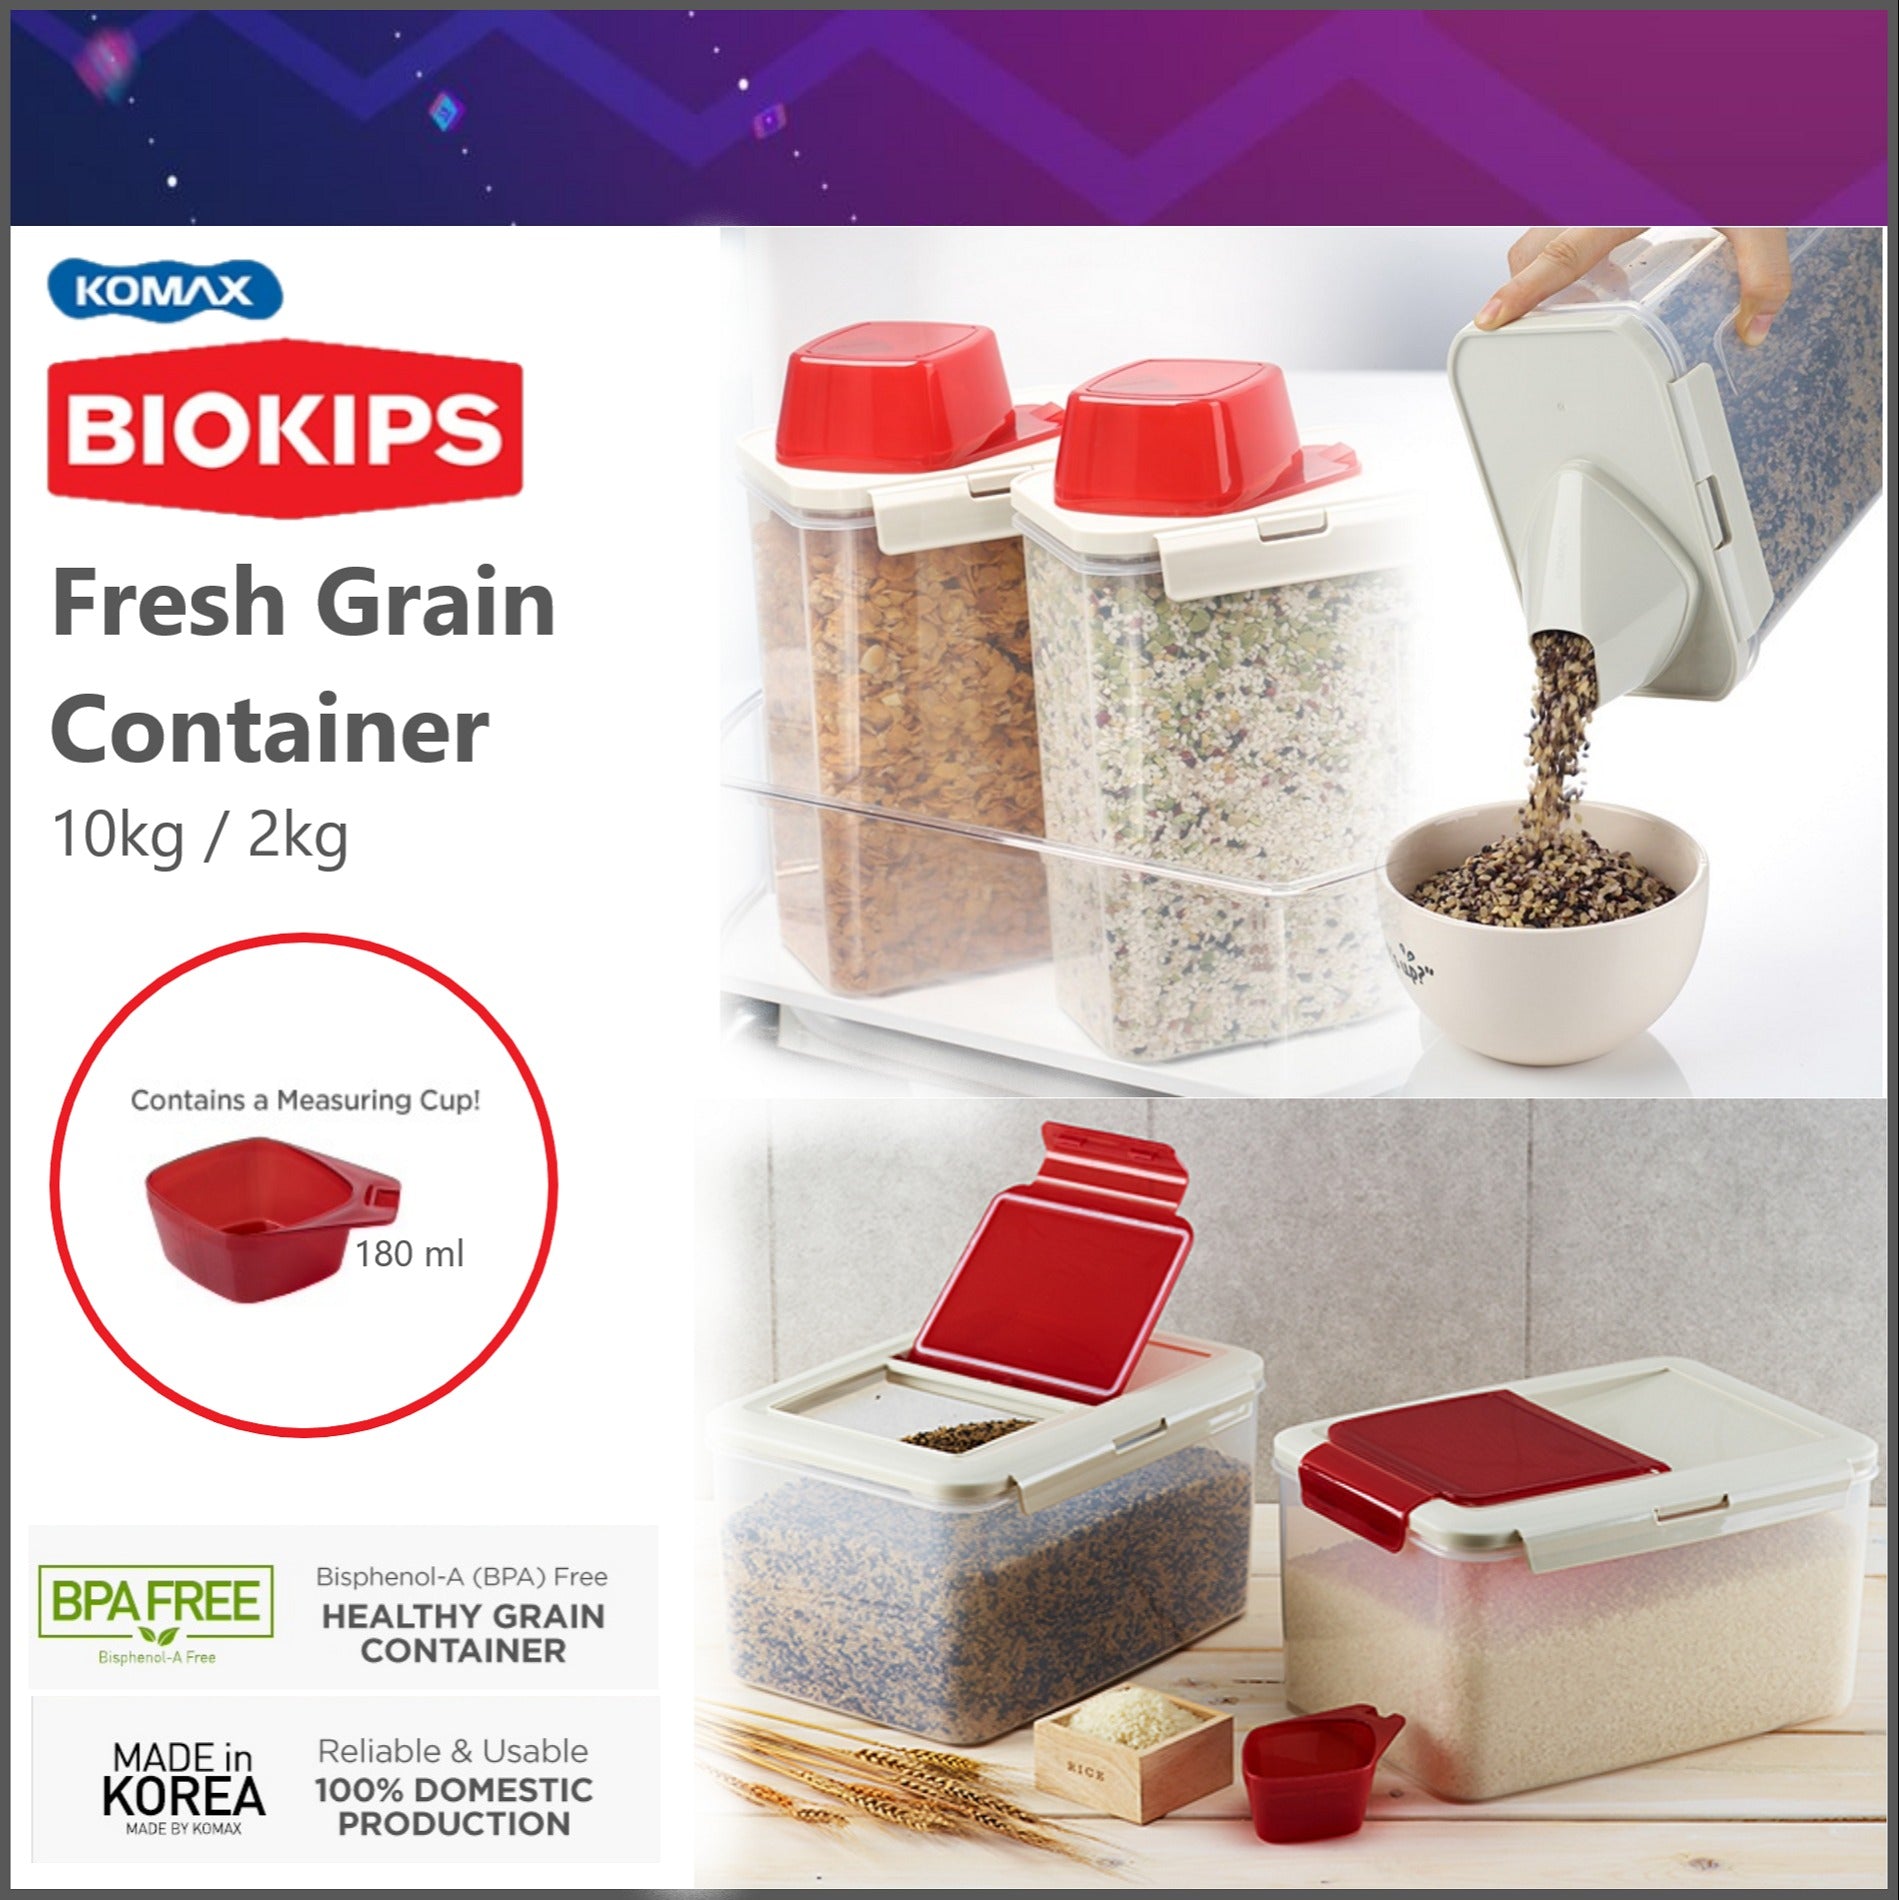 Komax Biokips Fresh Grain Container, 2 Kg - Whole and All